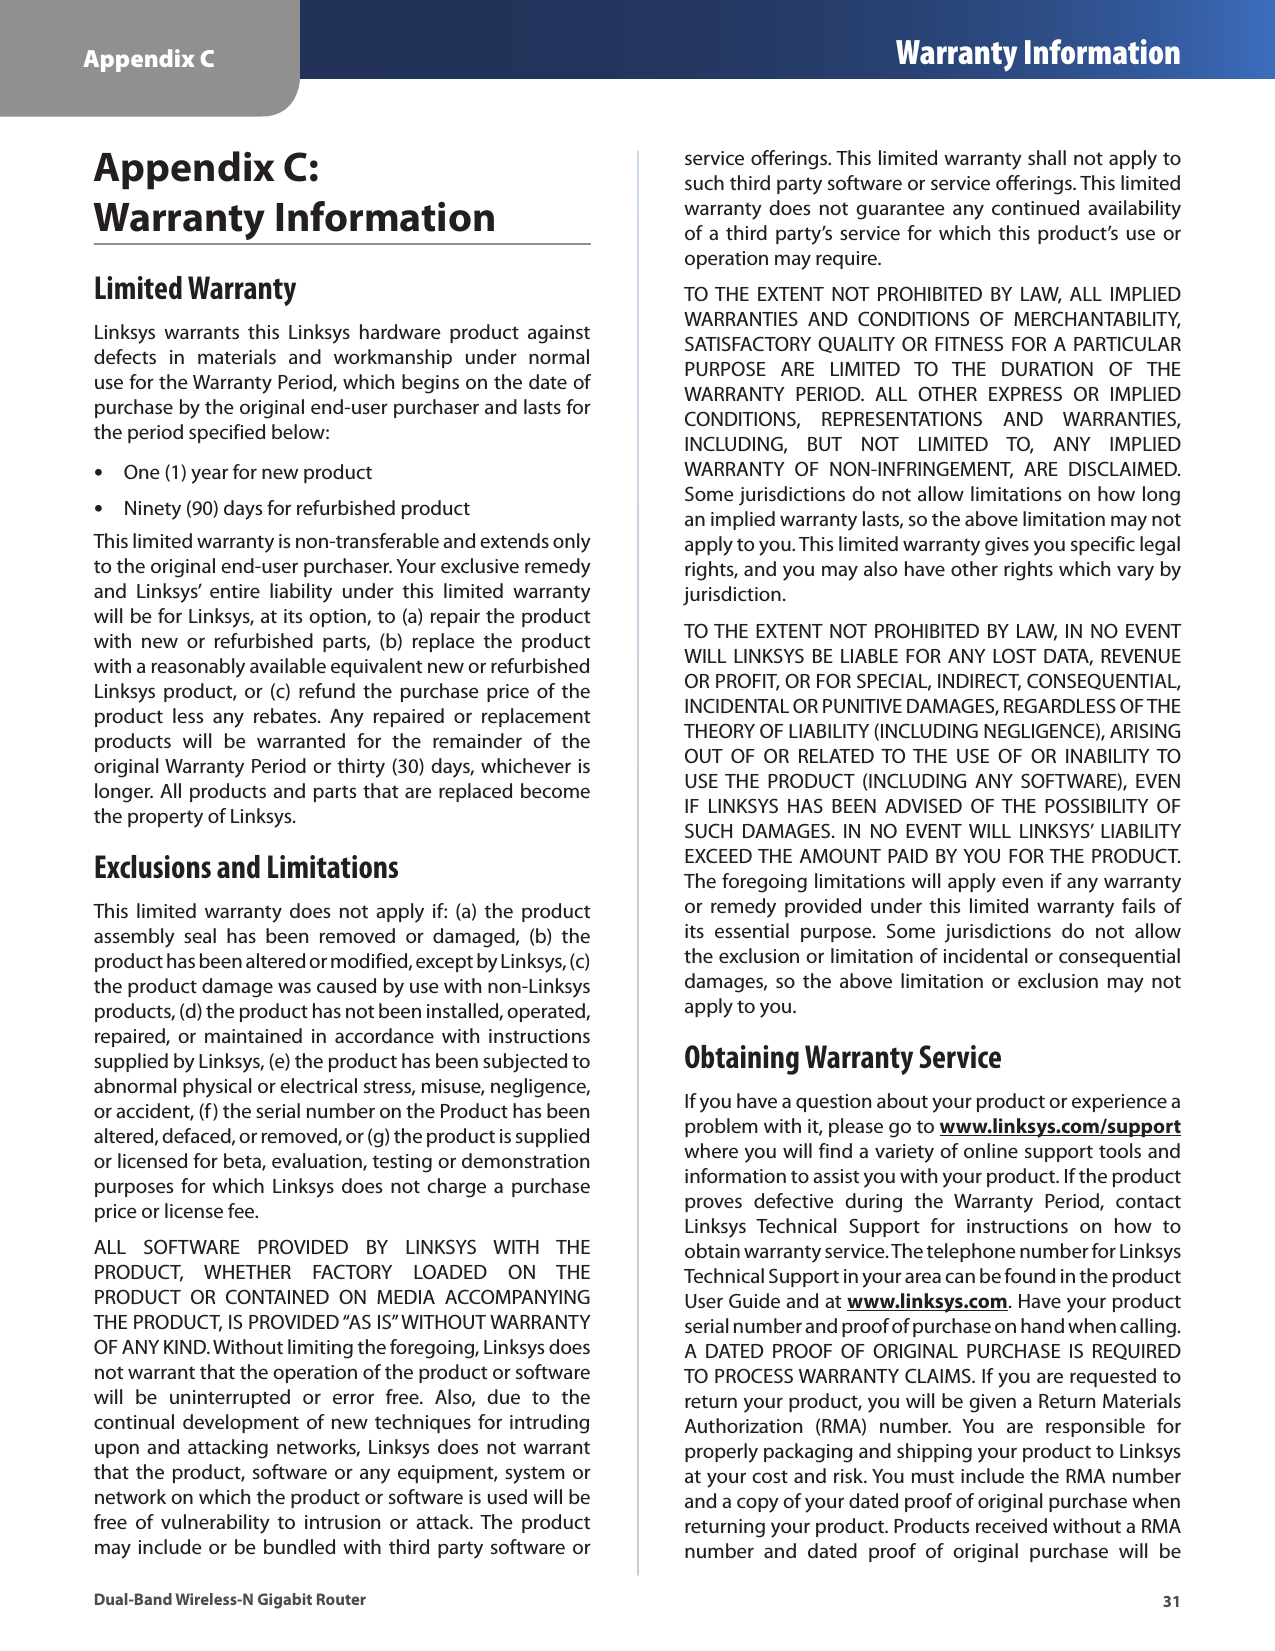 Appendix C Warranty Information31Dual-Band Wireless-N Gigabit RouterAppendix C:  Warranty InformationLimited WarrantyLinksys  warrants  this  Linksys  hardware  product  against defects  in  materials  and  workmanship  under  normal use for the Warranty Period, which begins on the date of purchase by the original end-user purchaser and lasts for the period specified below:One (1) year for new product •Ninety (90) days for refurbished product •This limited warranty is non-transferable and extends only to the original end-user purchaser. Your exclusive remedy and  Linksys’  entire  liability  under  this  limited  warranty will be for Linksys, at its option, to (a) repair the product with  new  or  refurbished  parts,  (b)  replace  the  product with a reasonably available equivalent new or refurbished Linksys product,  or  (c)  refund  the  purchase price of  the product  less  any  rebates.  Any  repaired  or  replacement products  will  be  warranted  for  the  remainder  of  the original Warranty Period or thirty (30) days, whichever is longer. All products and parts that are replaced become the property of Linksys.Exclusions and LimitationsThis  limited  warranty  does  not  apply  if:  (a)  the  product assembly  seal  has  been  removed  or  damaged,  (b)  the product has been altered or modified, except by Linksys, (c) the product damage was caused by use with non-Linksys products, (d) the product has not been installed, operated, repaired,  or  maintained  in  accordance  with  instructions supplied by Linksys, (e) the product has been subjected to abnormal physical or electrical stress, misuse, negligence, or accident, (f) the serial number on the Product has been altered, defaced, or removed, or (g) the product is supplied or licensed for beta, evaluation, testing or demonstration purposes for which Linksys does not  charge  a  purchase price or license fee.ALL  SOFTWARE  PROVIDED  BY  LINKSYS  WITH  THE PRODUCT,  WHETHER  FACTORY  LOADED  ON  THE PRODUCT  OR  CONTAINED  ON  MEDIA  ACCOMPANYING THE PRODUCT, IS PROVIDED “AS IS” WITHOUT WARRANTY OF ANY KIND. Without limiting the foregoing, Linksys does not warrant that the operation of the product or software will  be  uninterrupted  or  error  free.  Also,  due  to  the continual development of new techniques for intruding upon and  attacking networks, Linksys  does  not  warrant that the product, software or any equipment, system or network on which the product or software is used will be free  of  vulnerability  to  intrusion  or  attack. The  product may include  or be bundled with third party software or service offerings. This limited warranty shall not apply to such third party software or service offerings. This limited warranty  does  not  guarantee  any  continued  availability of a  third  party’s  service  for  which  this product’s  use or operation may require. TO THE  EXTENT  NOT  PROHIBITED  BY  LAW,  ALL  IMPLIED WARRANTIES  AND  CONDITIONS  OF  MERCHANTABILITY, SATISFACTORY QUALITY  OR FITNESS FOR A PARTICULAR PURPOSE  ARE  LIMITED  TO  THE  DURATION  OF  THE WARRANTY  PERIOD.  ALL  OTHER  EXPRESS  OR  IMPLIED CONDITIONS,  REPRESENTATIONS  AND  WARRANTIES, INCLUDING,  BUT  NOT  LIMITED  TO,  ANY  IMPLIED WARRANTY  OF  NON-INFRINGEMENT,  ARE  DISCLAIMED. Some jurisdictions do not allow limitations on how long an implied warranty lasts, so the above limitation may not apply to you. This limited warranty gives you specific legal rights, and you may also have other rights which vary by jurisdiction.TO THE  EXTENT  NOT PROHIBITED  BY LAW, IN NO EVENT WILL LINKSYS BE LIABLE FOR  ANY LOST DATA, REVENUE OR PROFIT, OR FOR SPECIAL, INDIRECT, CONSEQUENTIAL, INCIDENTAL OR PUNITIVE DAMAGES, REGARDLESS OF THE THEORY OF LIABILITY (INCLUDING NEGLIGENCE), ARISING OUT  OF  OR  RELATED  TO  THE  USE  OF  OR  INABILITY  TO USE THE  PRODUCT  (INCLUDING  ANY  SOFTWARE),  EVEN IF  LINKSYS  HAS  BEEN  ADVISED  OF THE  POSSIBILITY  OF SUCH  DAMAGES.  IN  NO  EVENT  WILL  LINKSYS’  LIABILITY EXCEED THE  AMOUNT PAID BY YOU FOR THE PRODUCT. The foregoing limitations will apply even if any warranty or  remedy provided  under  this  limited warranty  fails  of its  essential  purpose.  Some  jurisdictions  do  not  allow the exclusion or limitation of incidental or consequential damages,  so  the  above  limitation  or  exclusion may  not apply to you.Obtaining Warranty ServiceIf you have a question about your product or experience a problem with it, please go to www.linksys.com/support where you will find a variety of online support tools and information to assist you with your product. If the product proves  defective  during  the  Warranty  Period,  contact Linksys  Technical  Support  for  instructions  on  how  to obtain warranty service. The telephone number for Linksys Technical Support in your area can be found in the product User Guide and at www.linksys.com. Have your product serial number and proof of purchase on hand when calling. A  DATED  PROOF  OF  ORIGINAL  PURCHASE  IS  REQUIRED TO PROCESS WARRANTY CLAIMS. If you are requested to return your product, you will be given a Return Materials Authorization  (RMA)  number.  You  are  responsible  for properly packaging and shipping your product to Linksys at your cost and risk. You must include the RMA number and a copy of your dated proof of original purchase when returning your product. Products received without a RMA number  and  dated  proof  of  original  purchase  will  be 